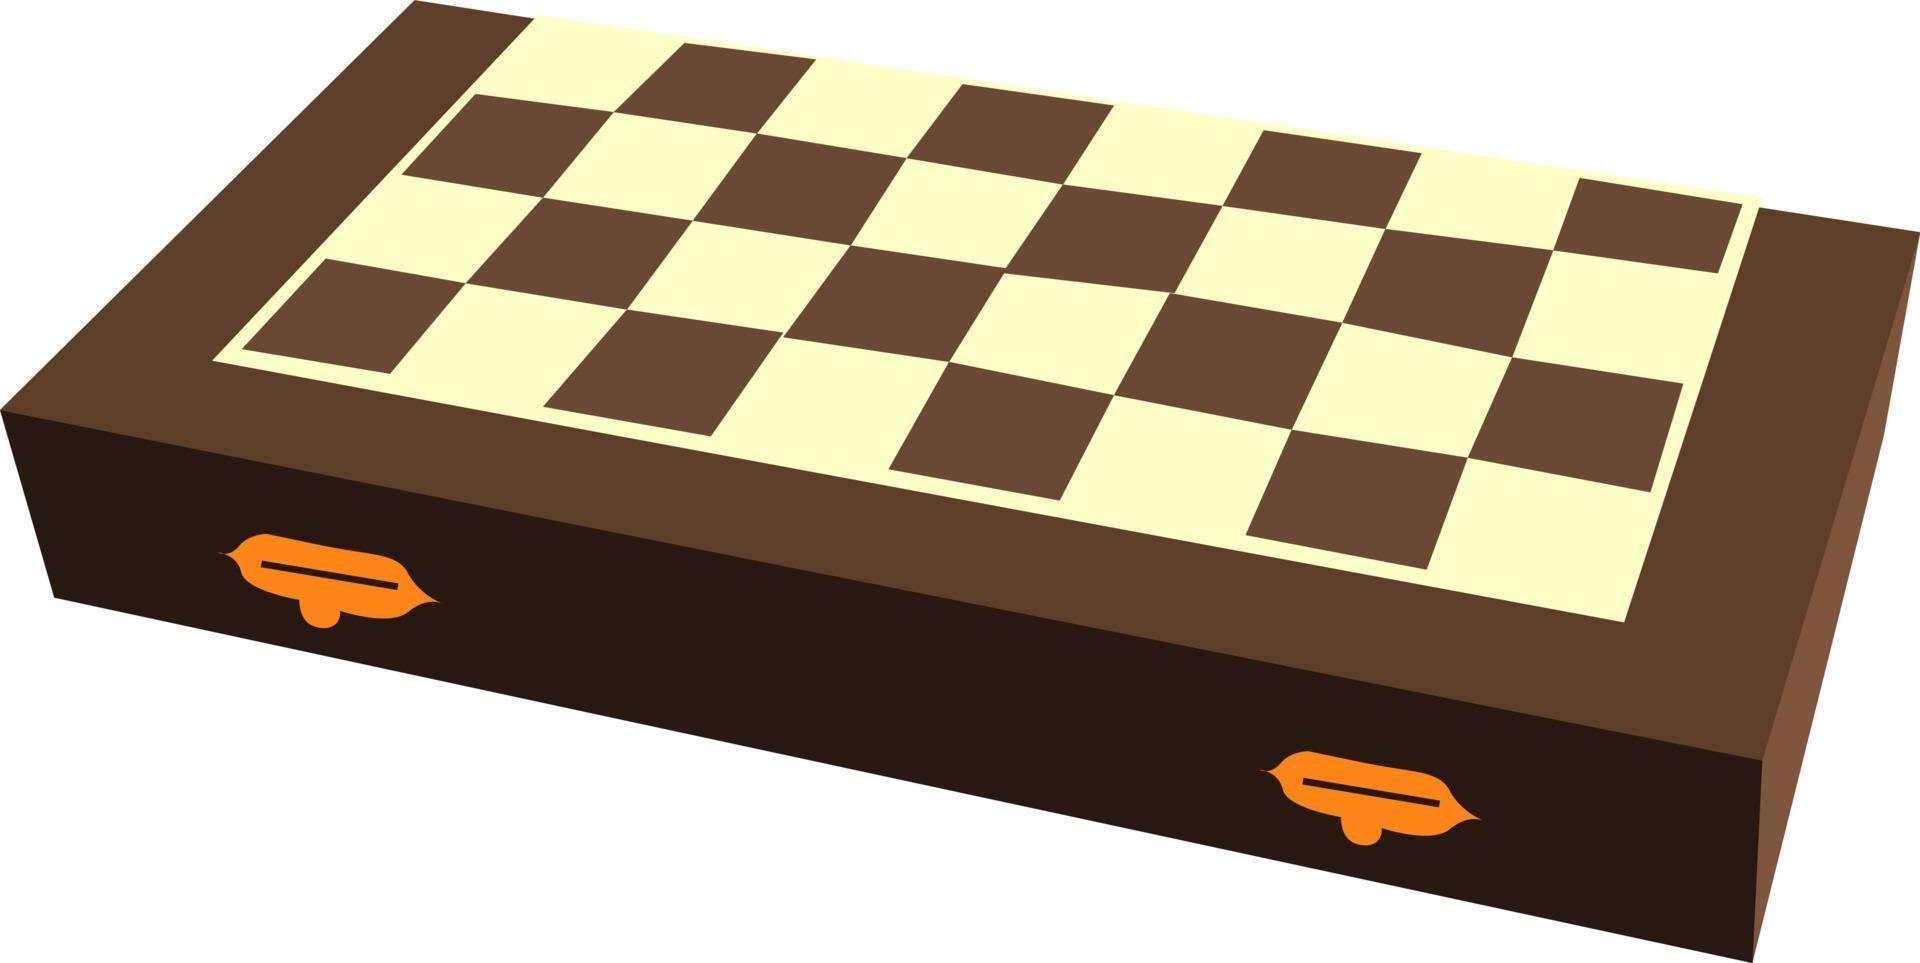 Chess board, illustration, vector on white background.